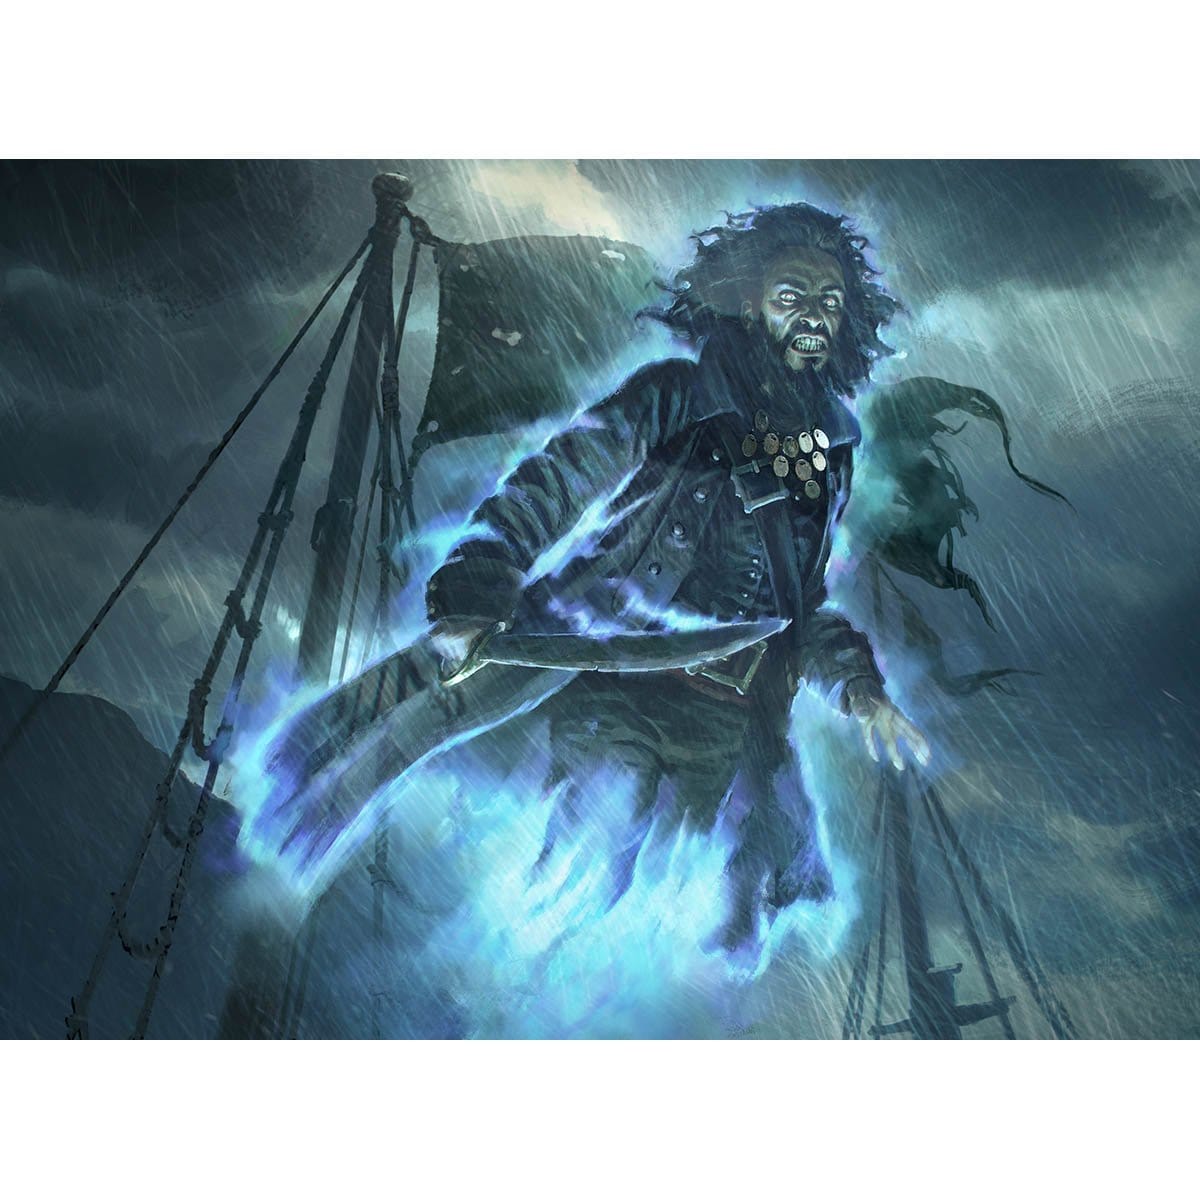 Spectral Sailor Print - Print - Original Magic Art - Accessories for Magic the Gathering and other card games